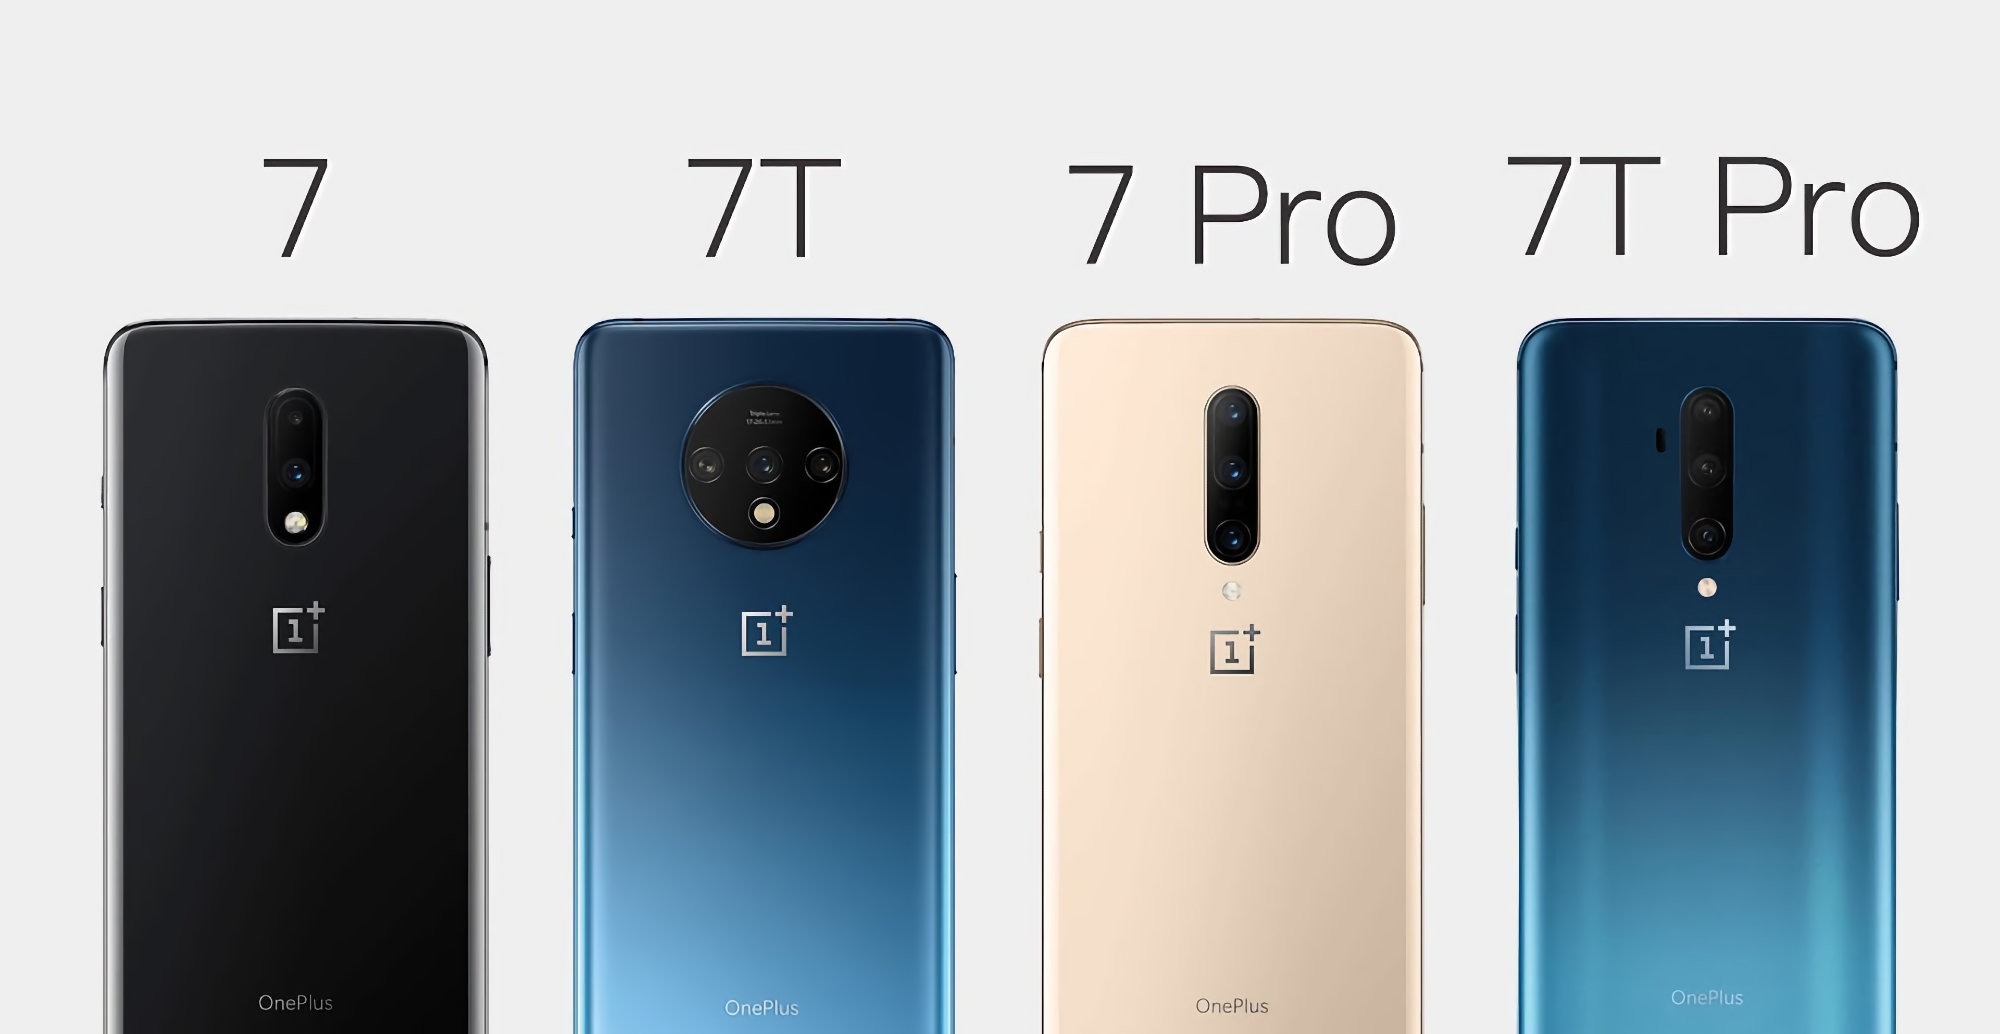 Finally! OnePlus 7, OnePlus 7 Pro, OnePlus 7T and OnePlus 7T Pro received a stable version of Android 12 with OxygenOS 12